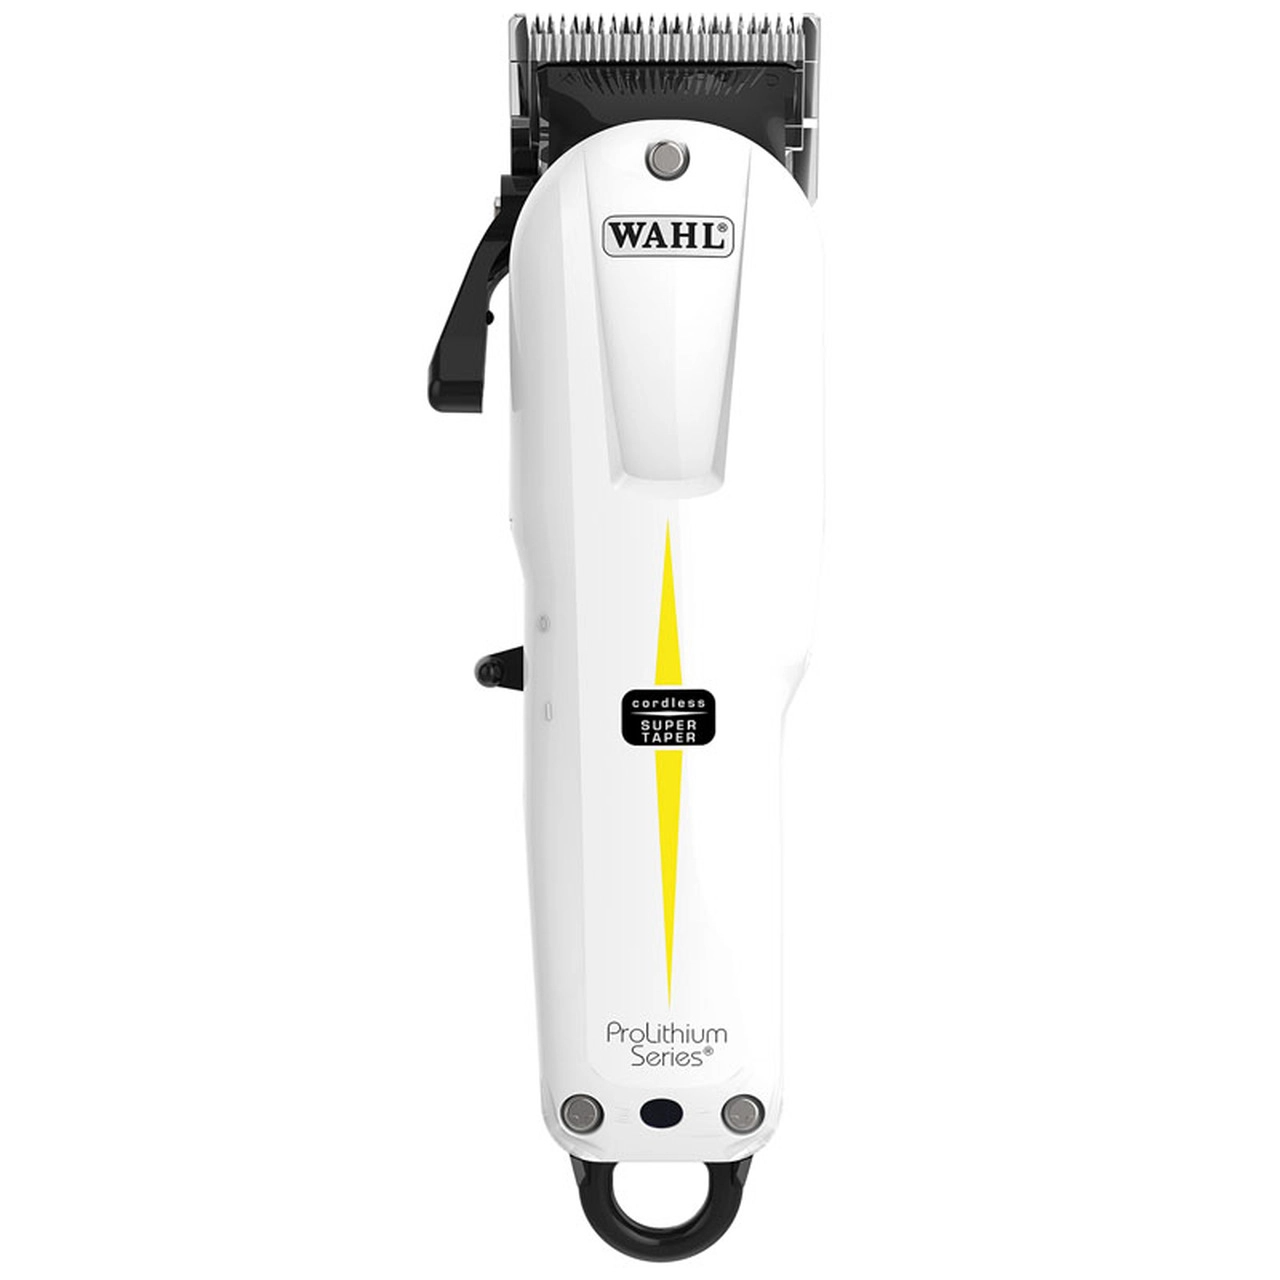 Wahl Super Taper cord/cordless hair clipper in GOLD 